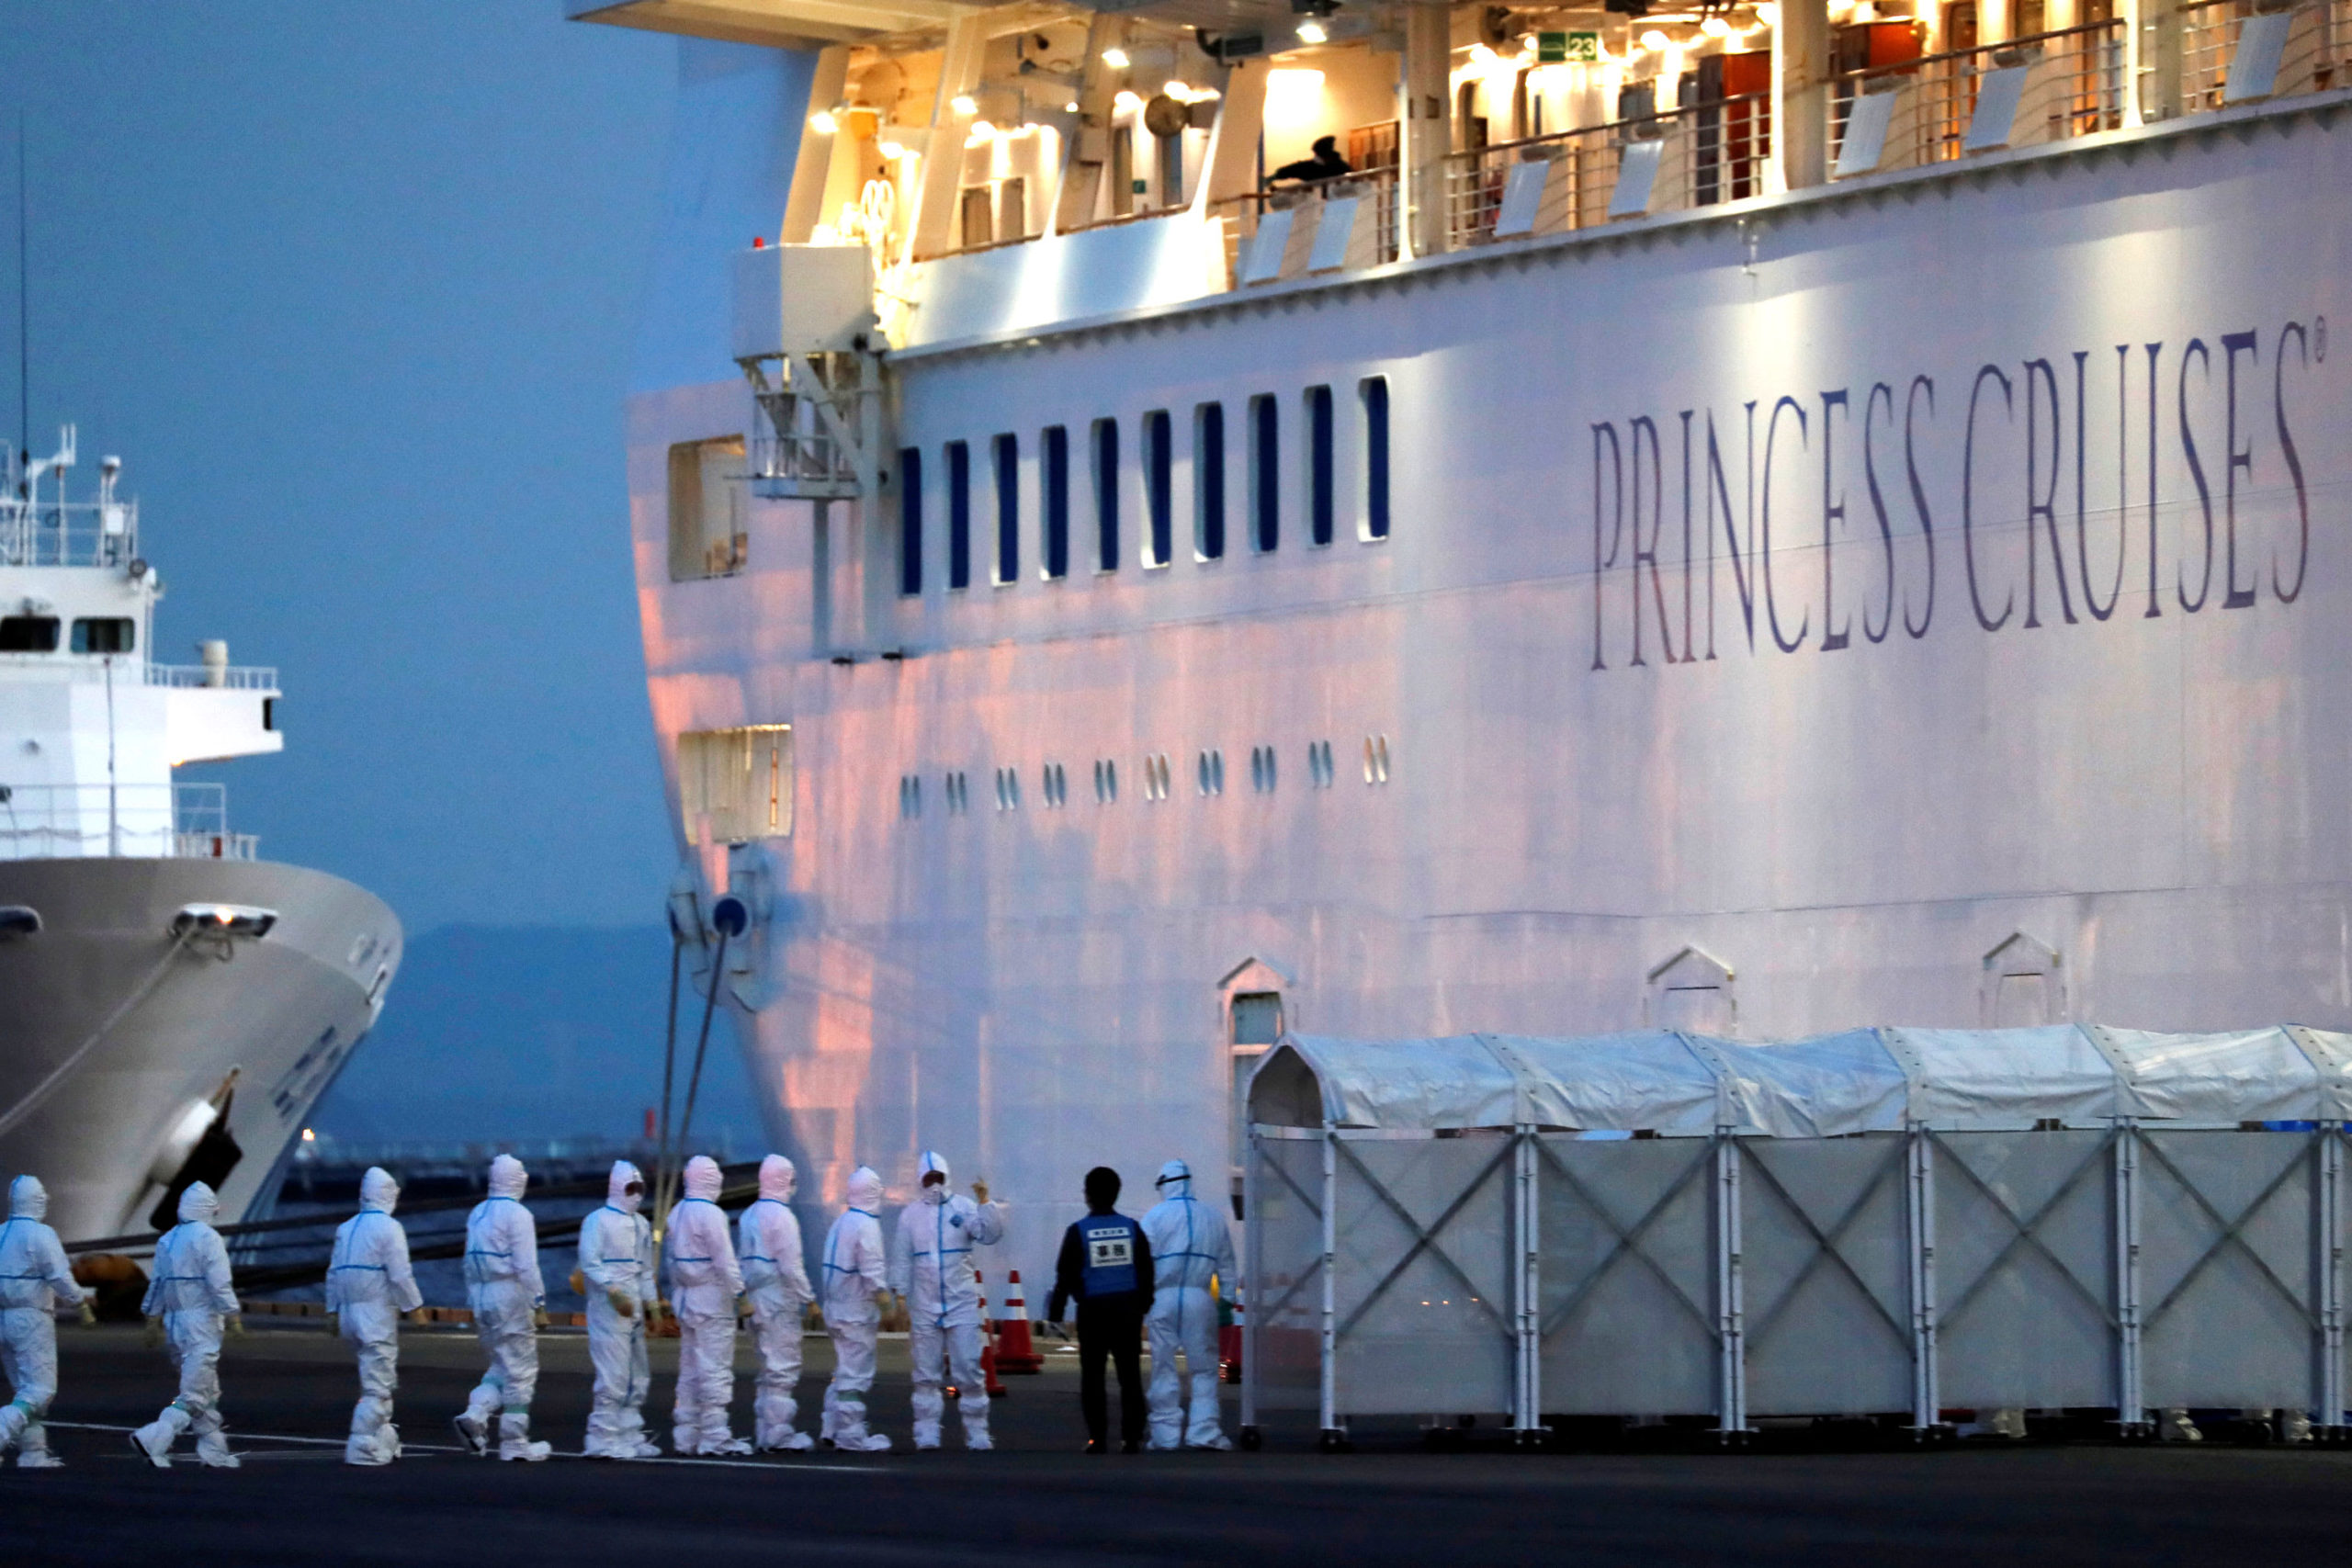 As coronavirus spreads on ship, Princess Cruises gives crew two months of trip